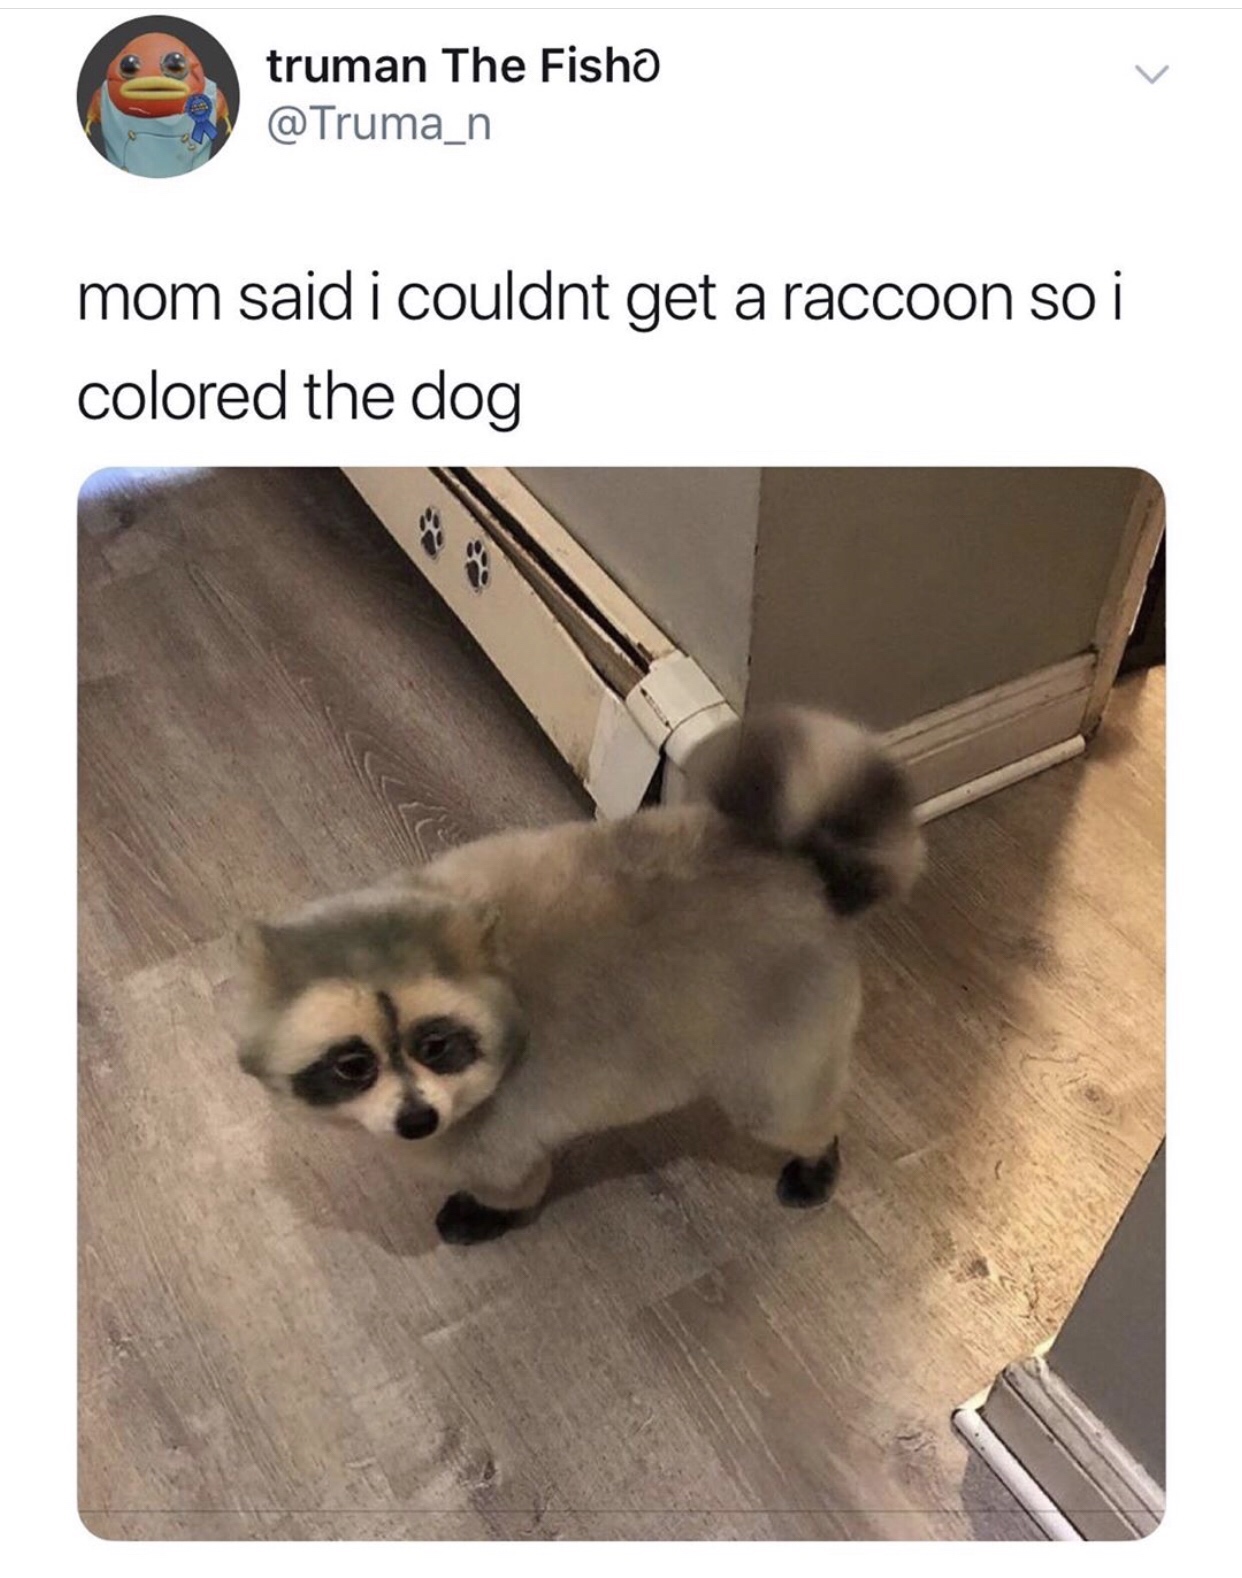 dog painted as raccoon - truman The Fisho mom said i couldnt get a raccoon so i colored the dog